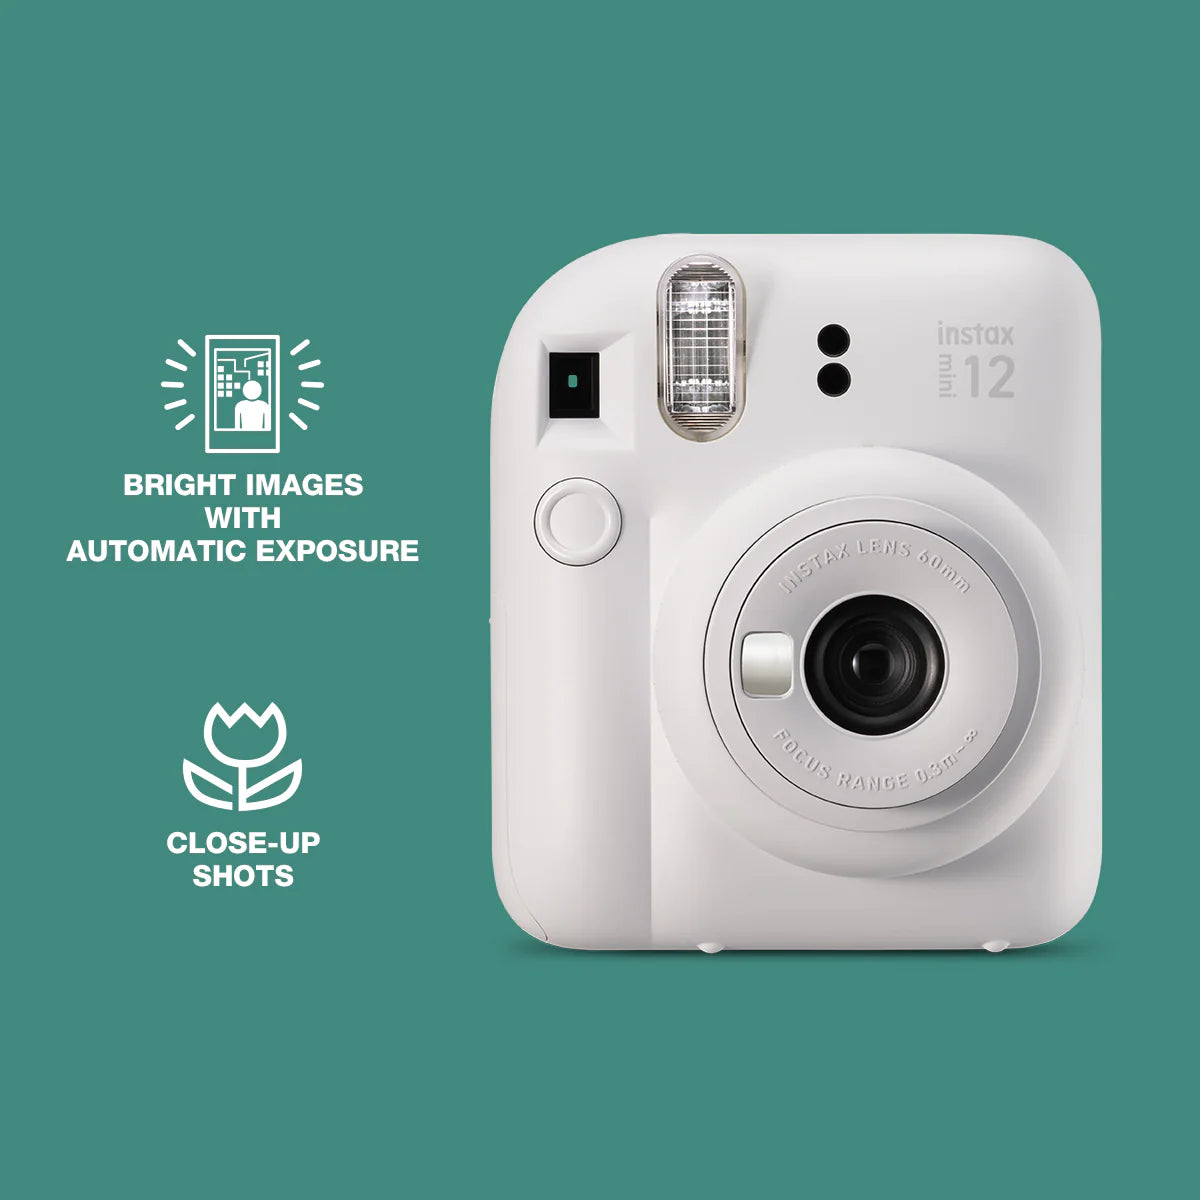 Fujifilm launches Instax Mini 12 instant camera: Digital Photography Review